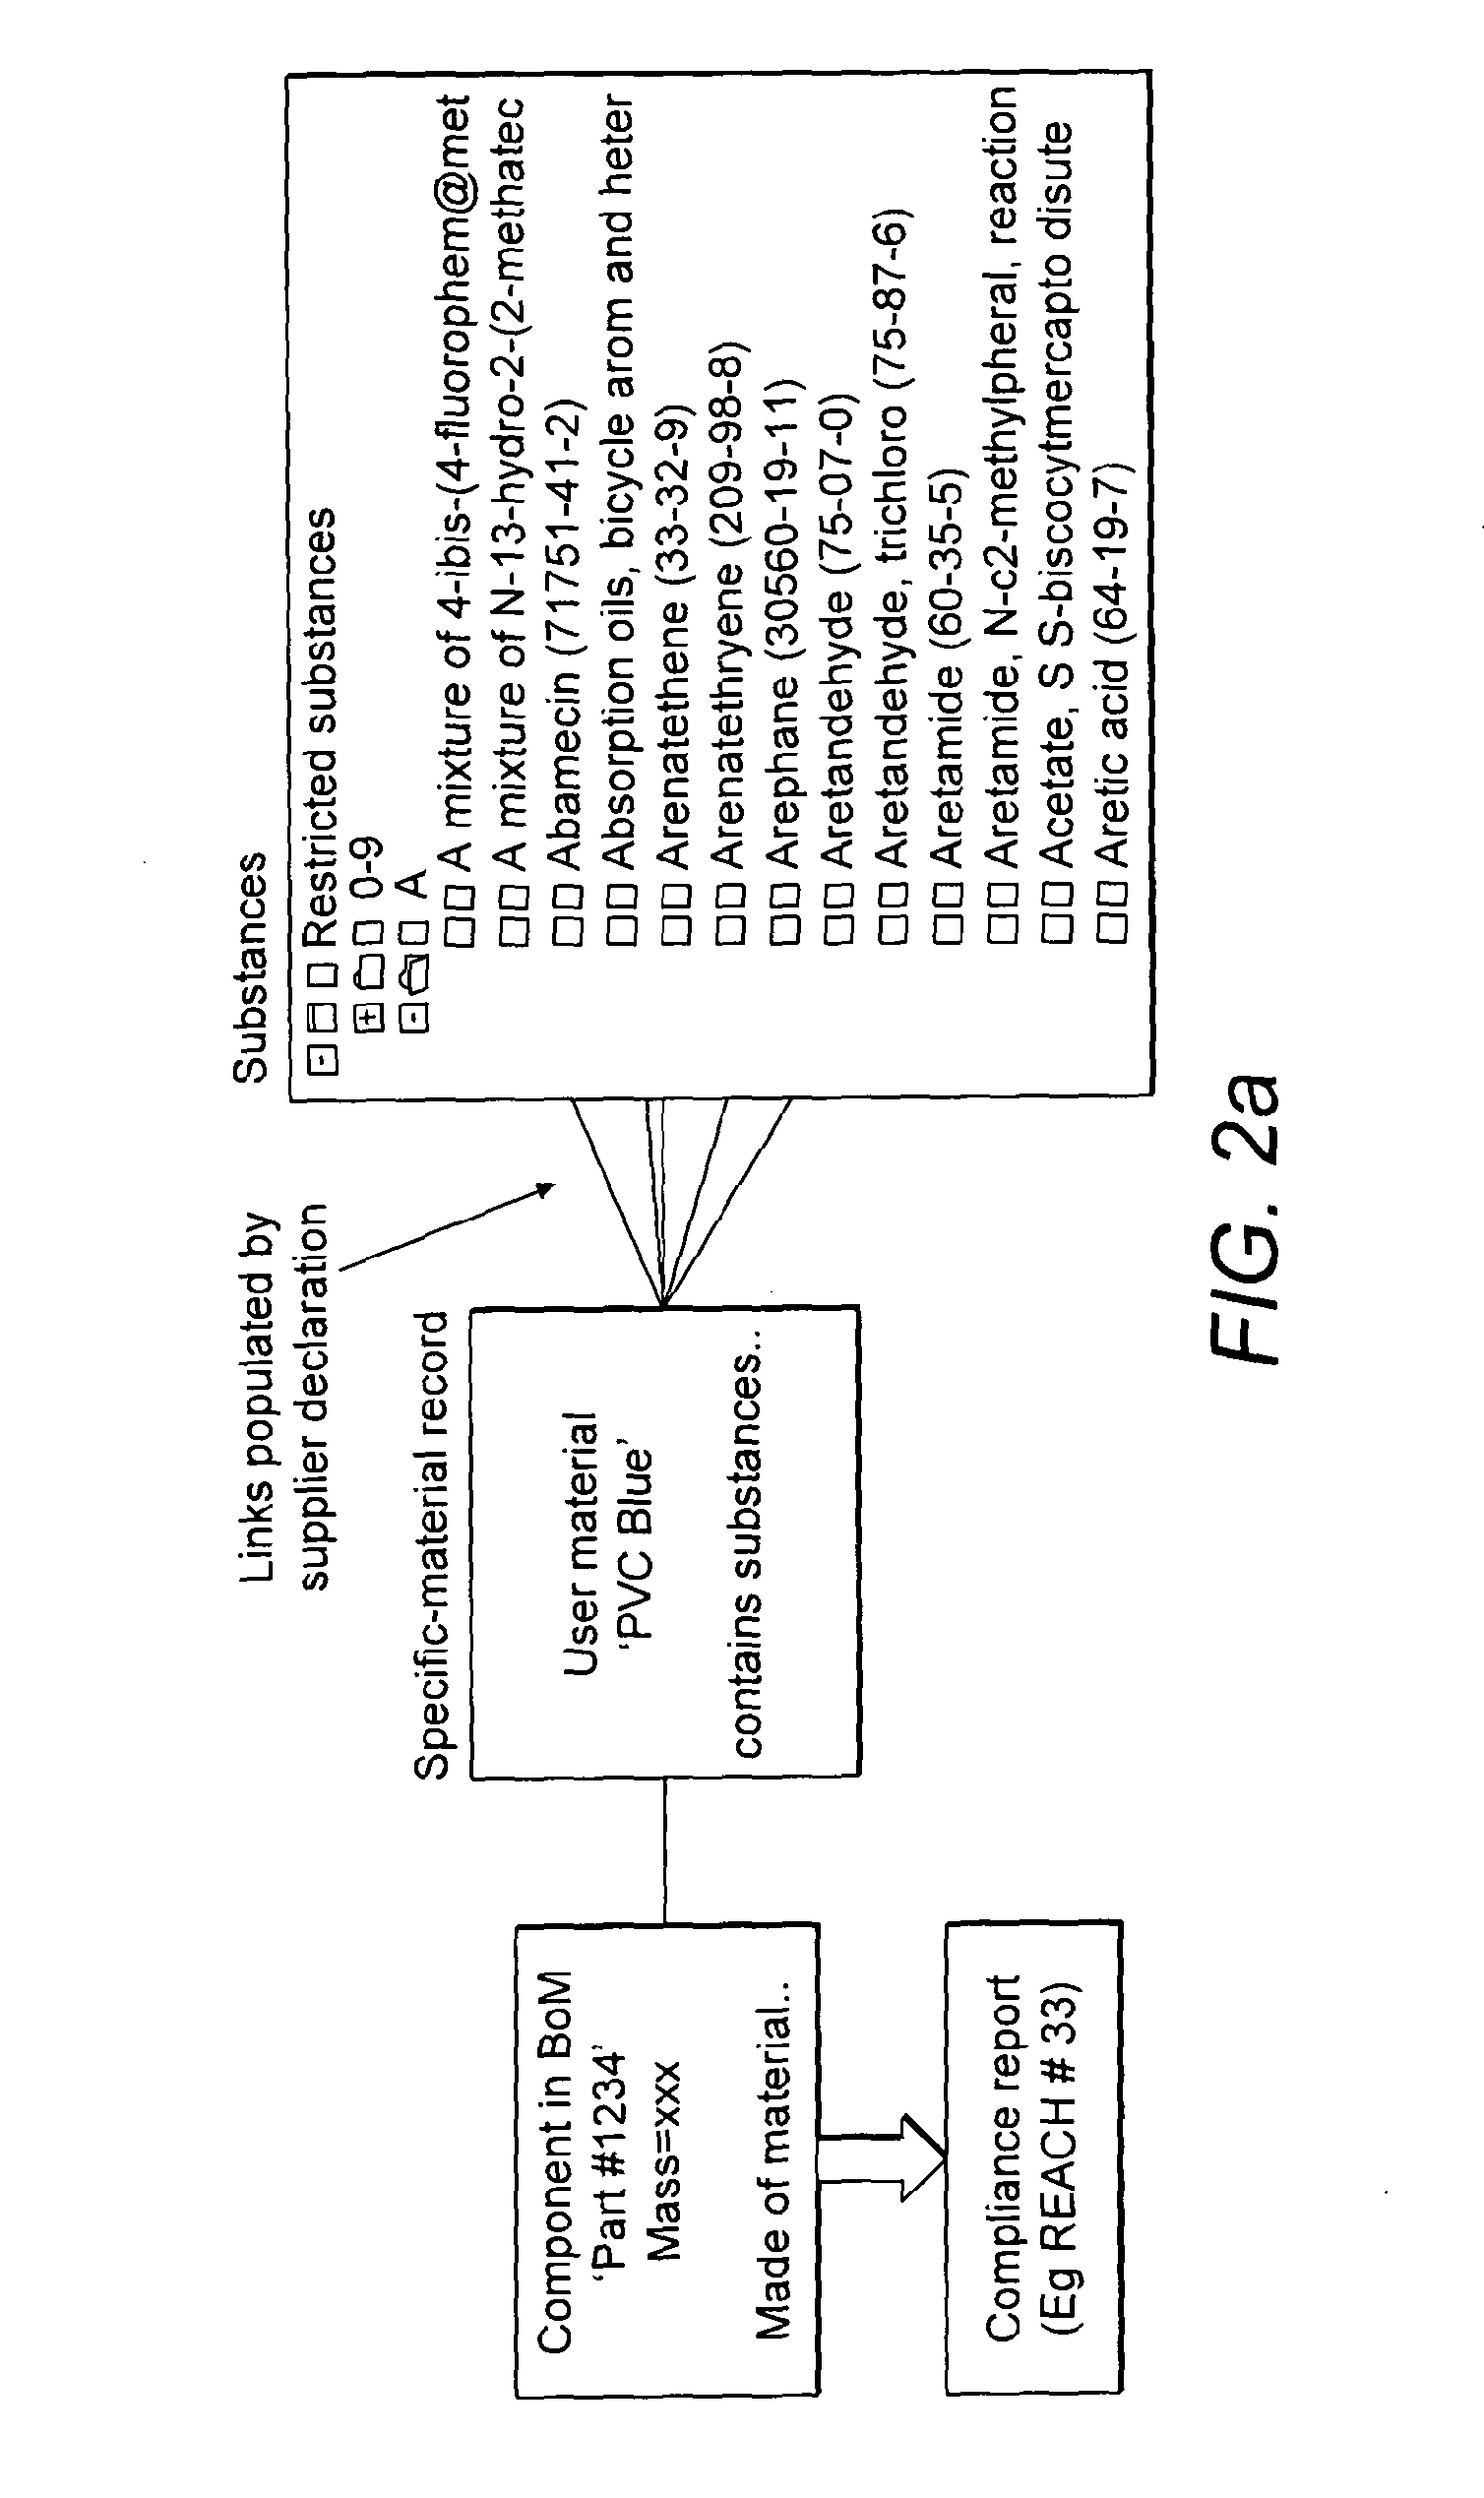 System for and method of estimating the chemical composition of an article